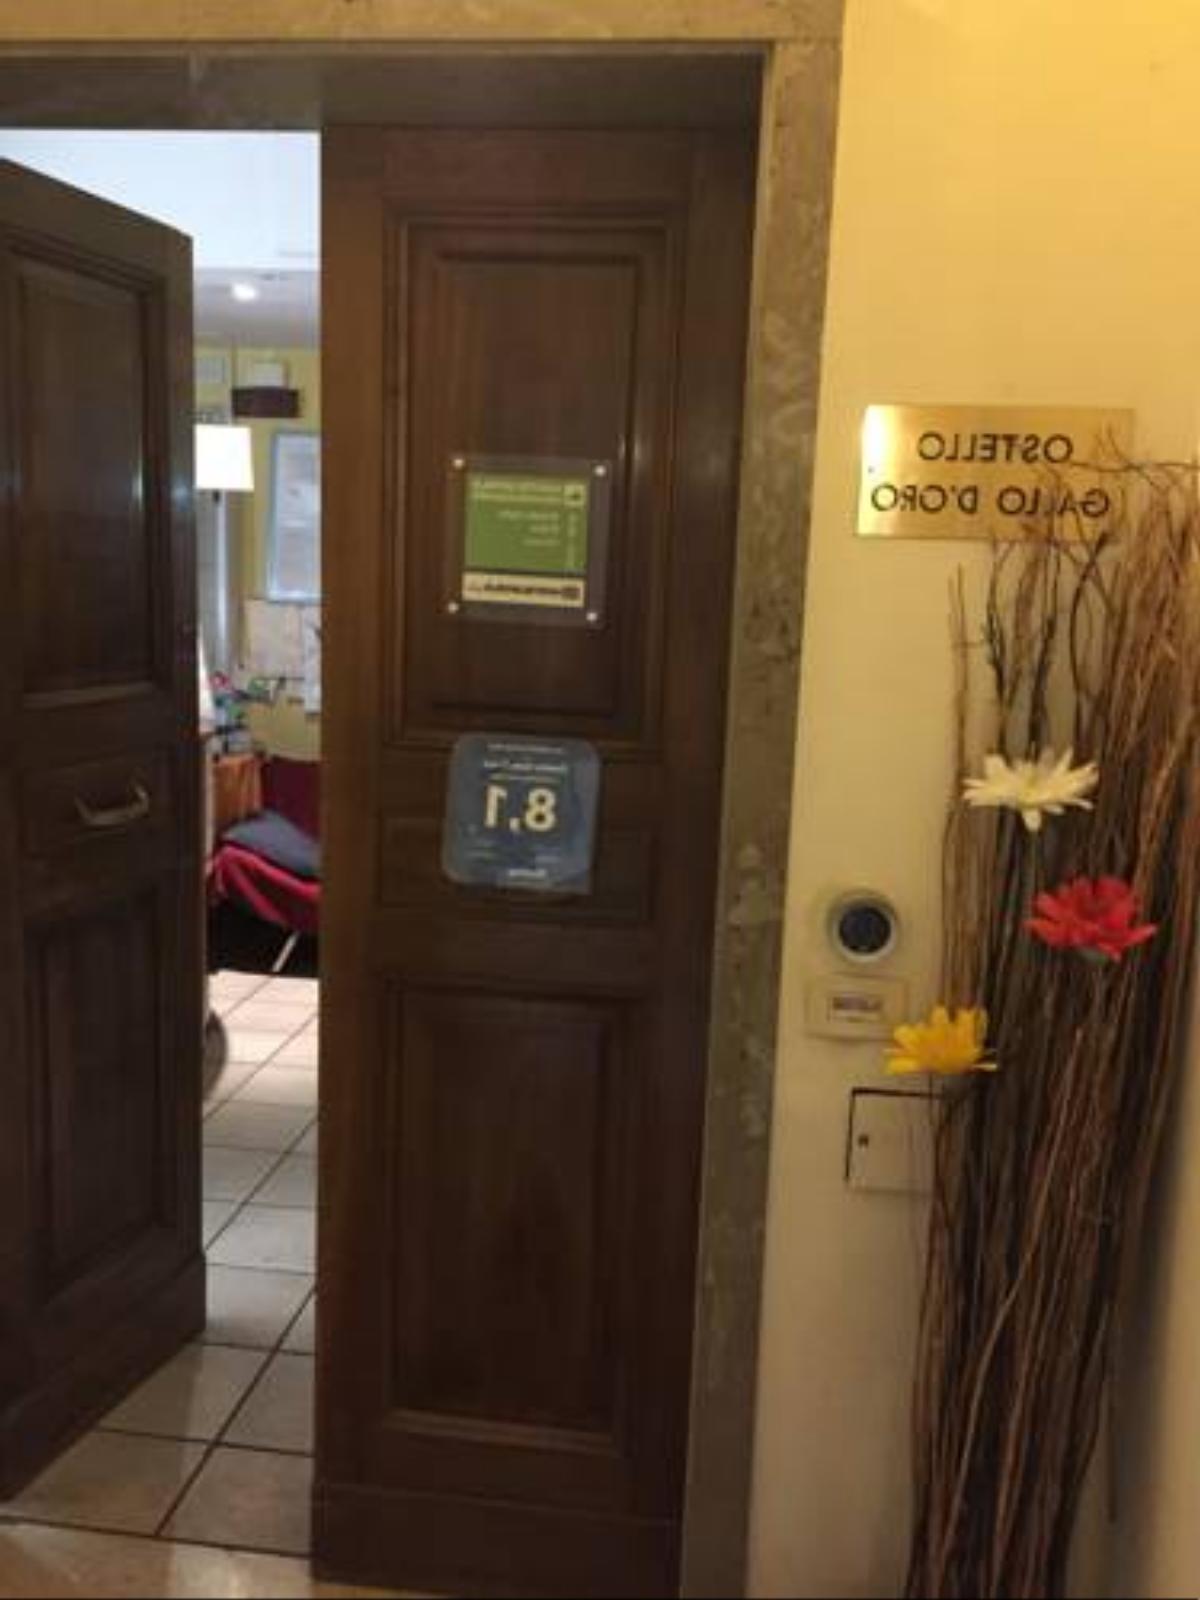 Hostel Gallo D'oro Hotel Florence Italy